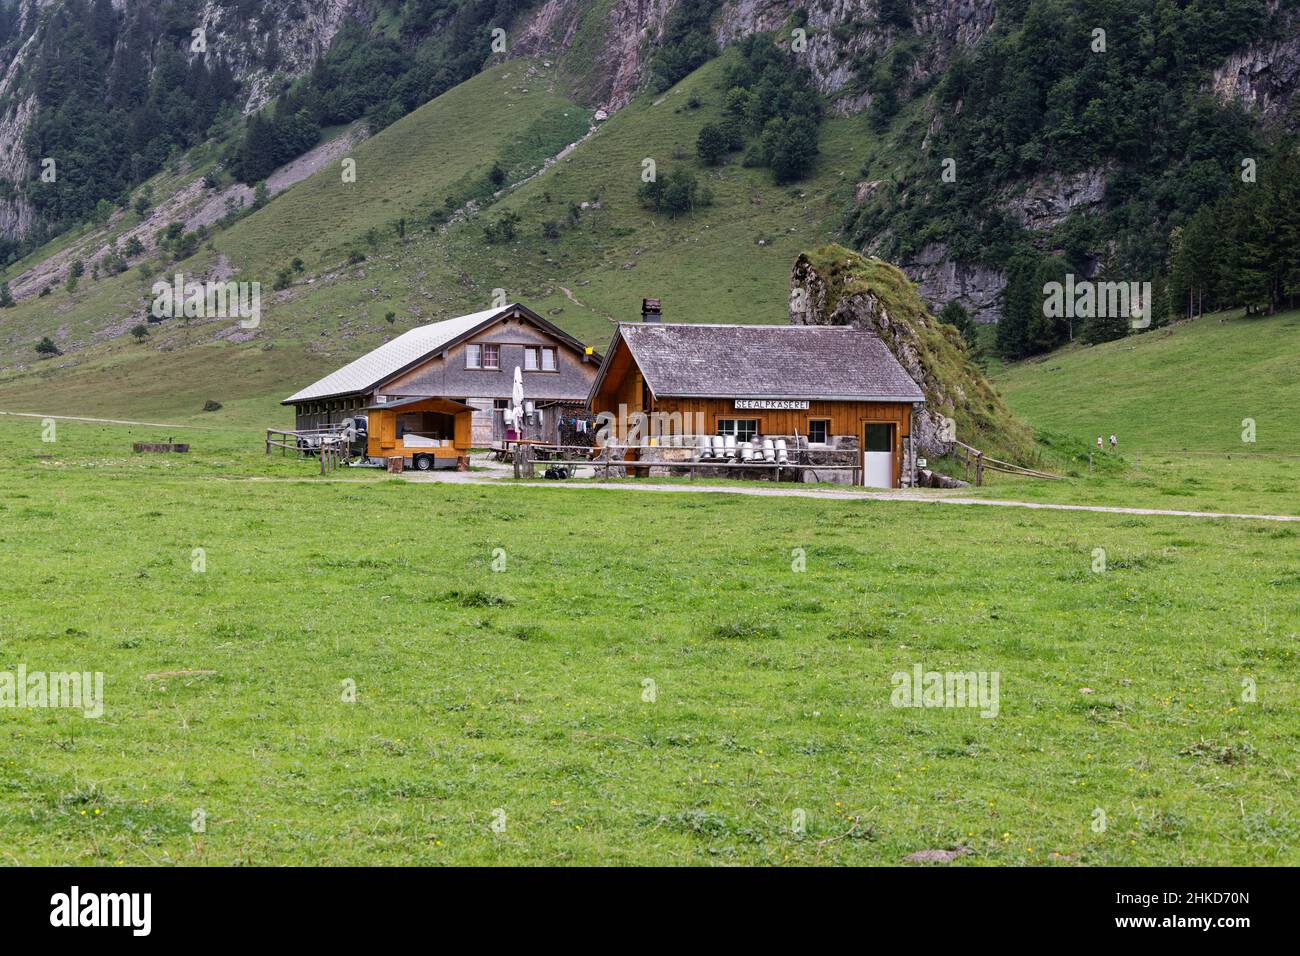 19.08.2021 Seealpsse Switzerland: old style alpine dairy built next to a rock wall, empty milk cans in front of the house, german alpine dairy sign wi Stock Photo